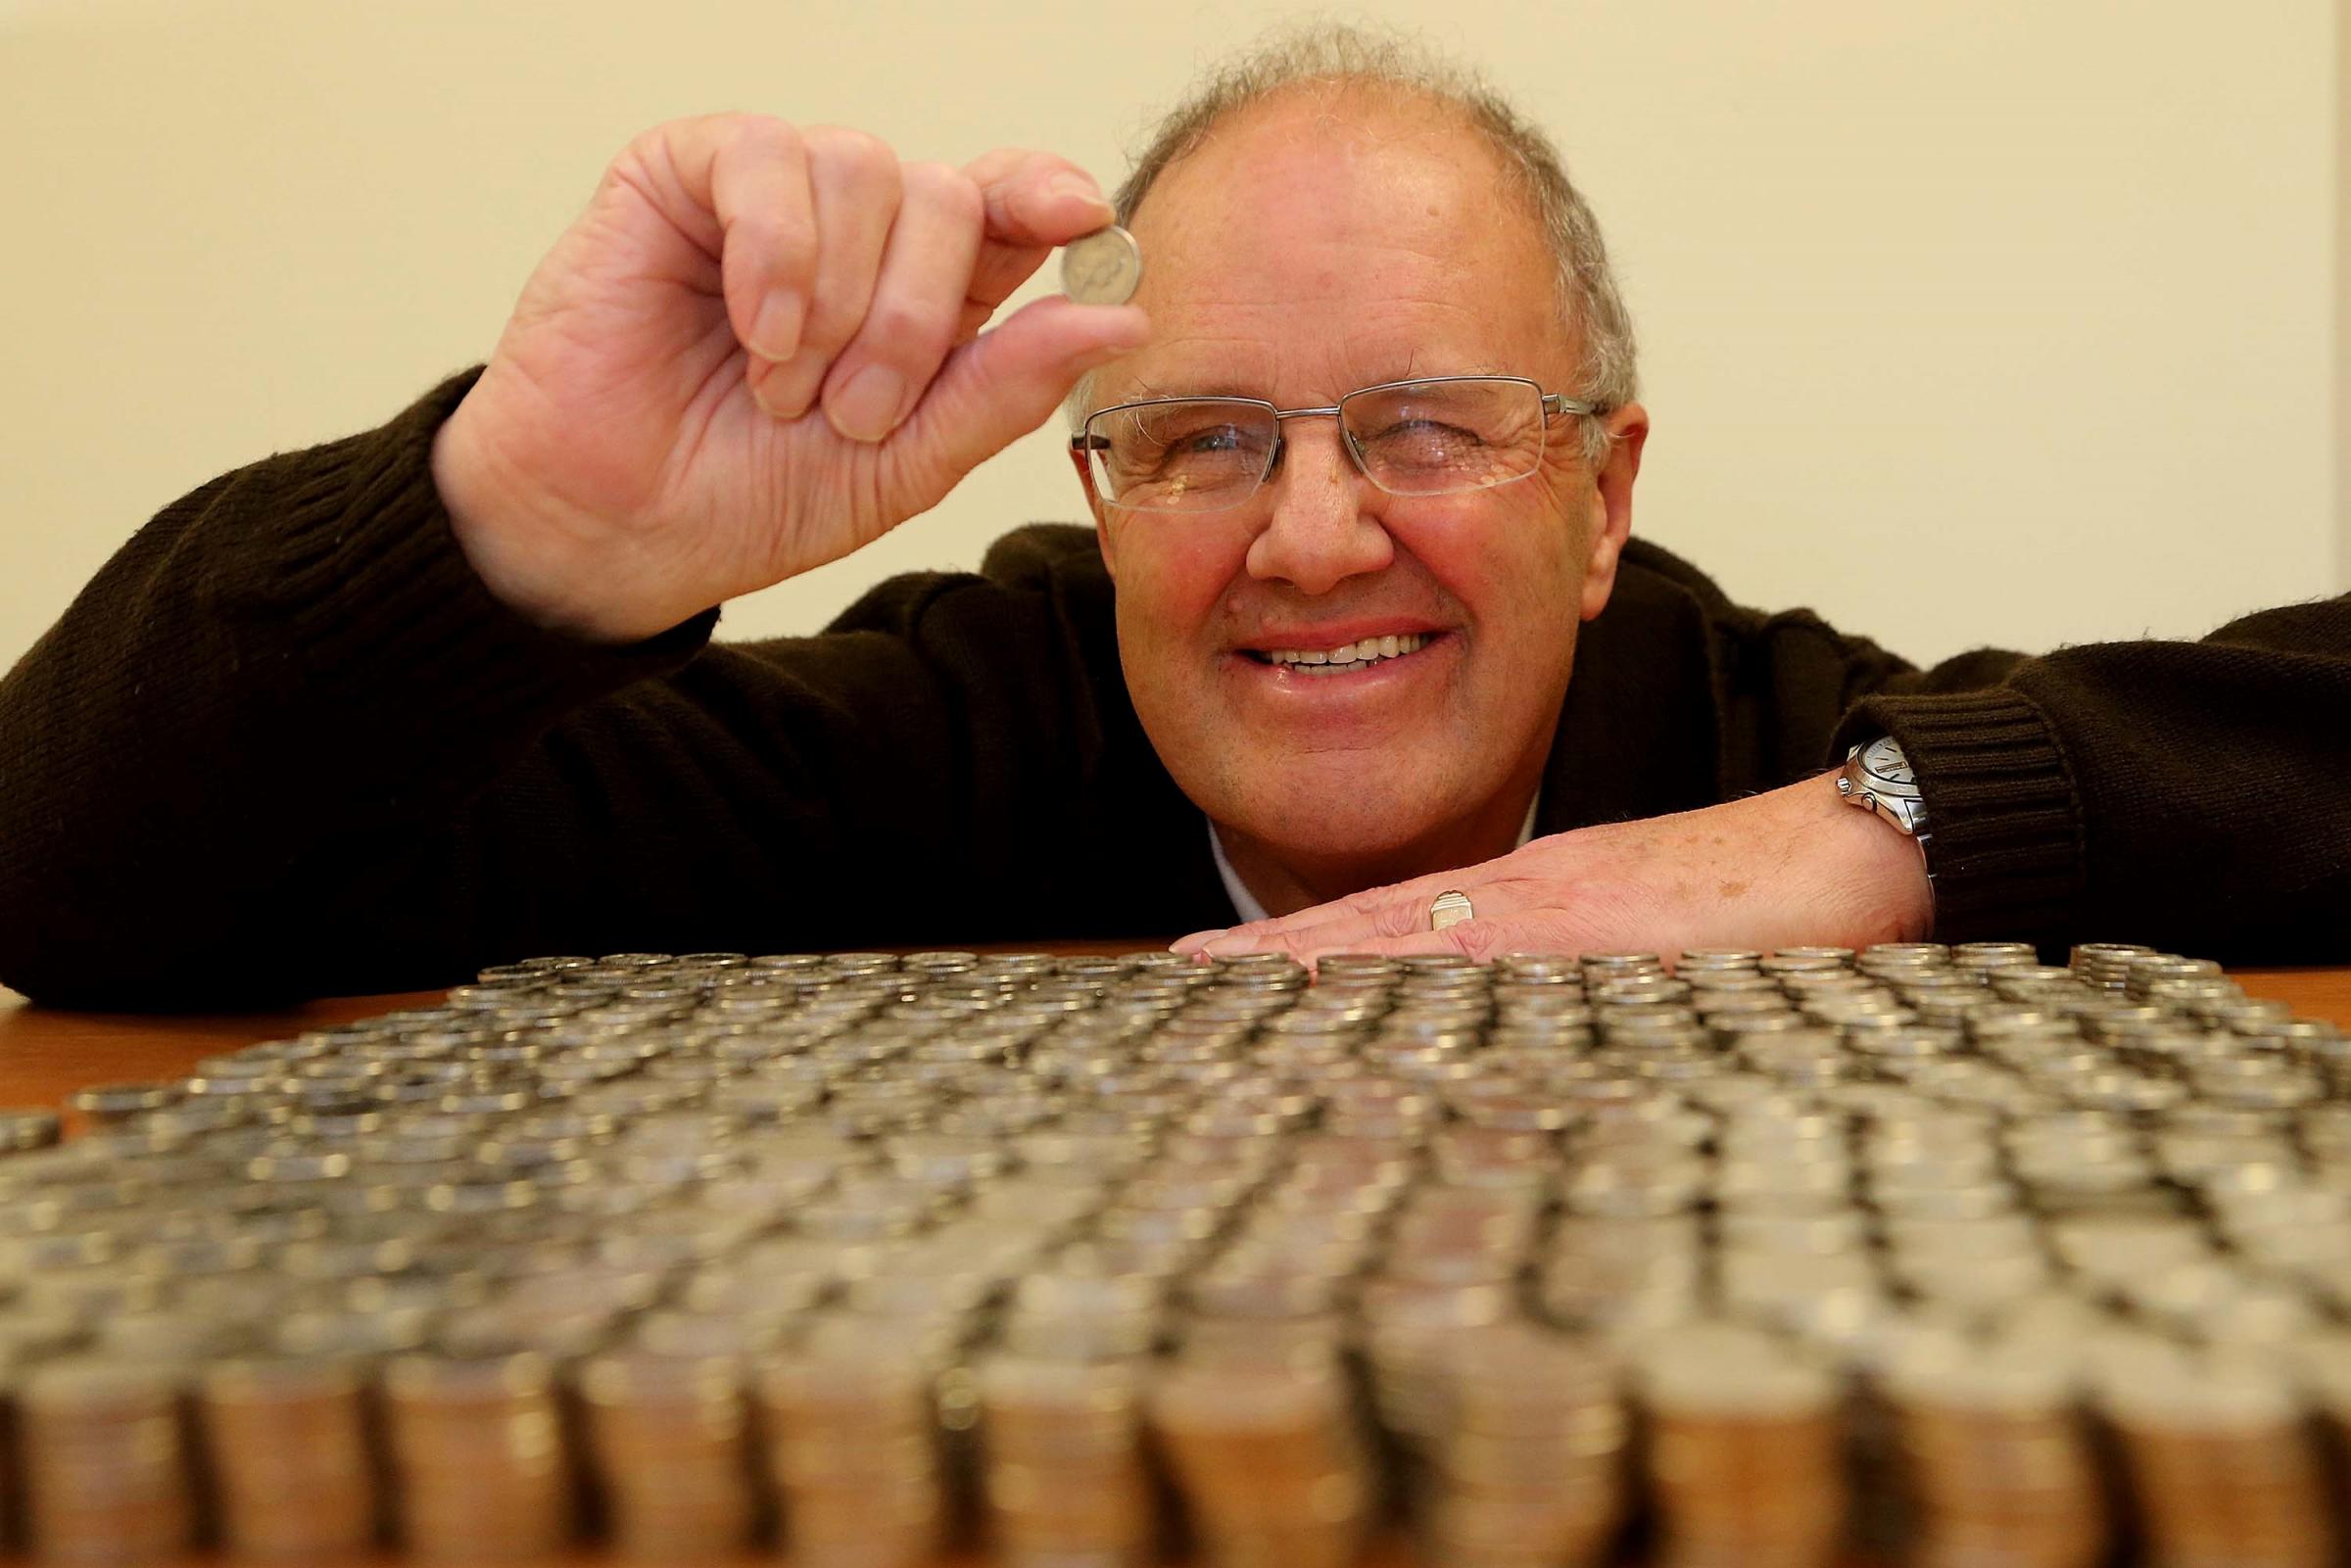 FUNDRAISER: Volunteer fundraiser Ian Watt (67) with just some of the half a million 5p pieces he has collected for the St Cuthberts Hospice in Durham. Picture DAVID WOOD.